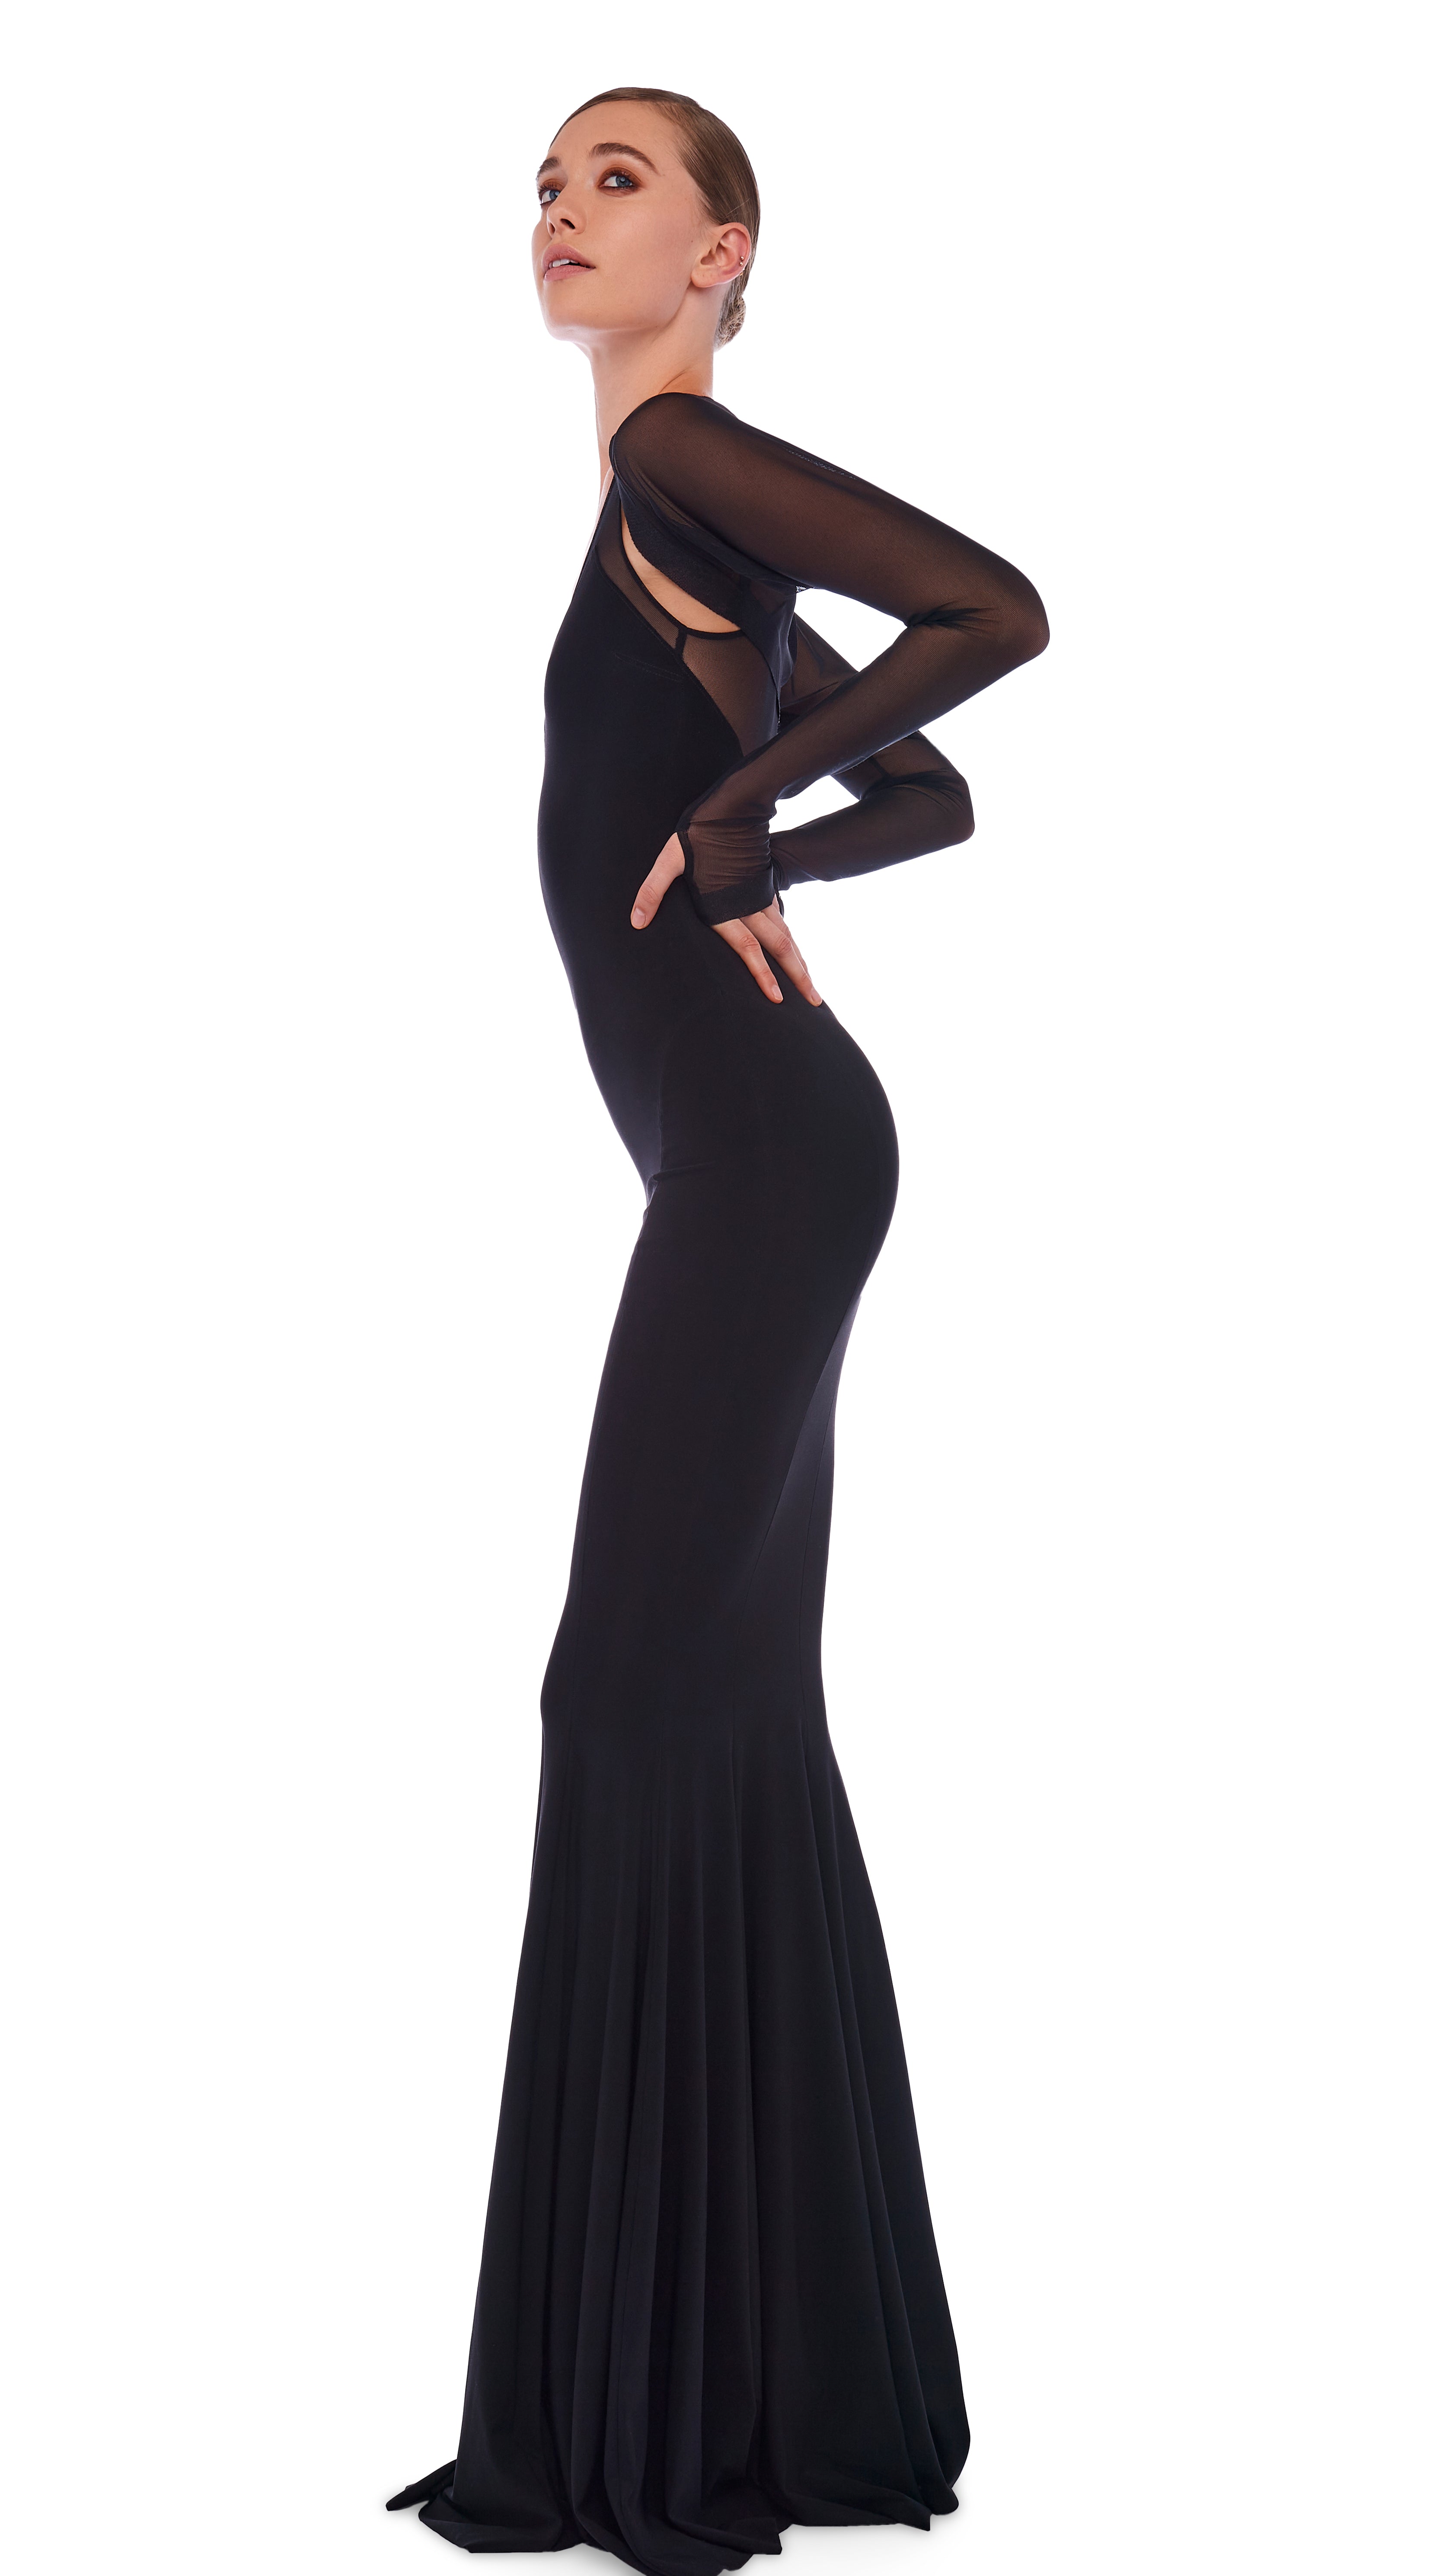 RACER FISHTAIL GOWN